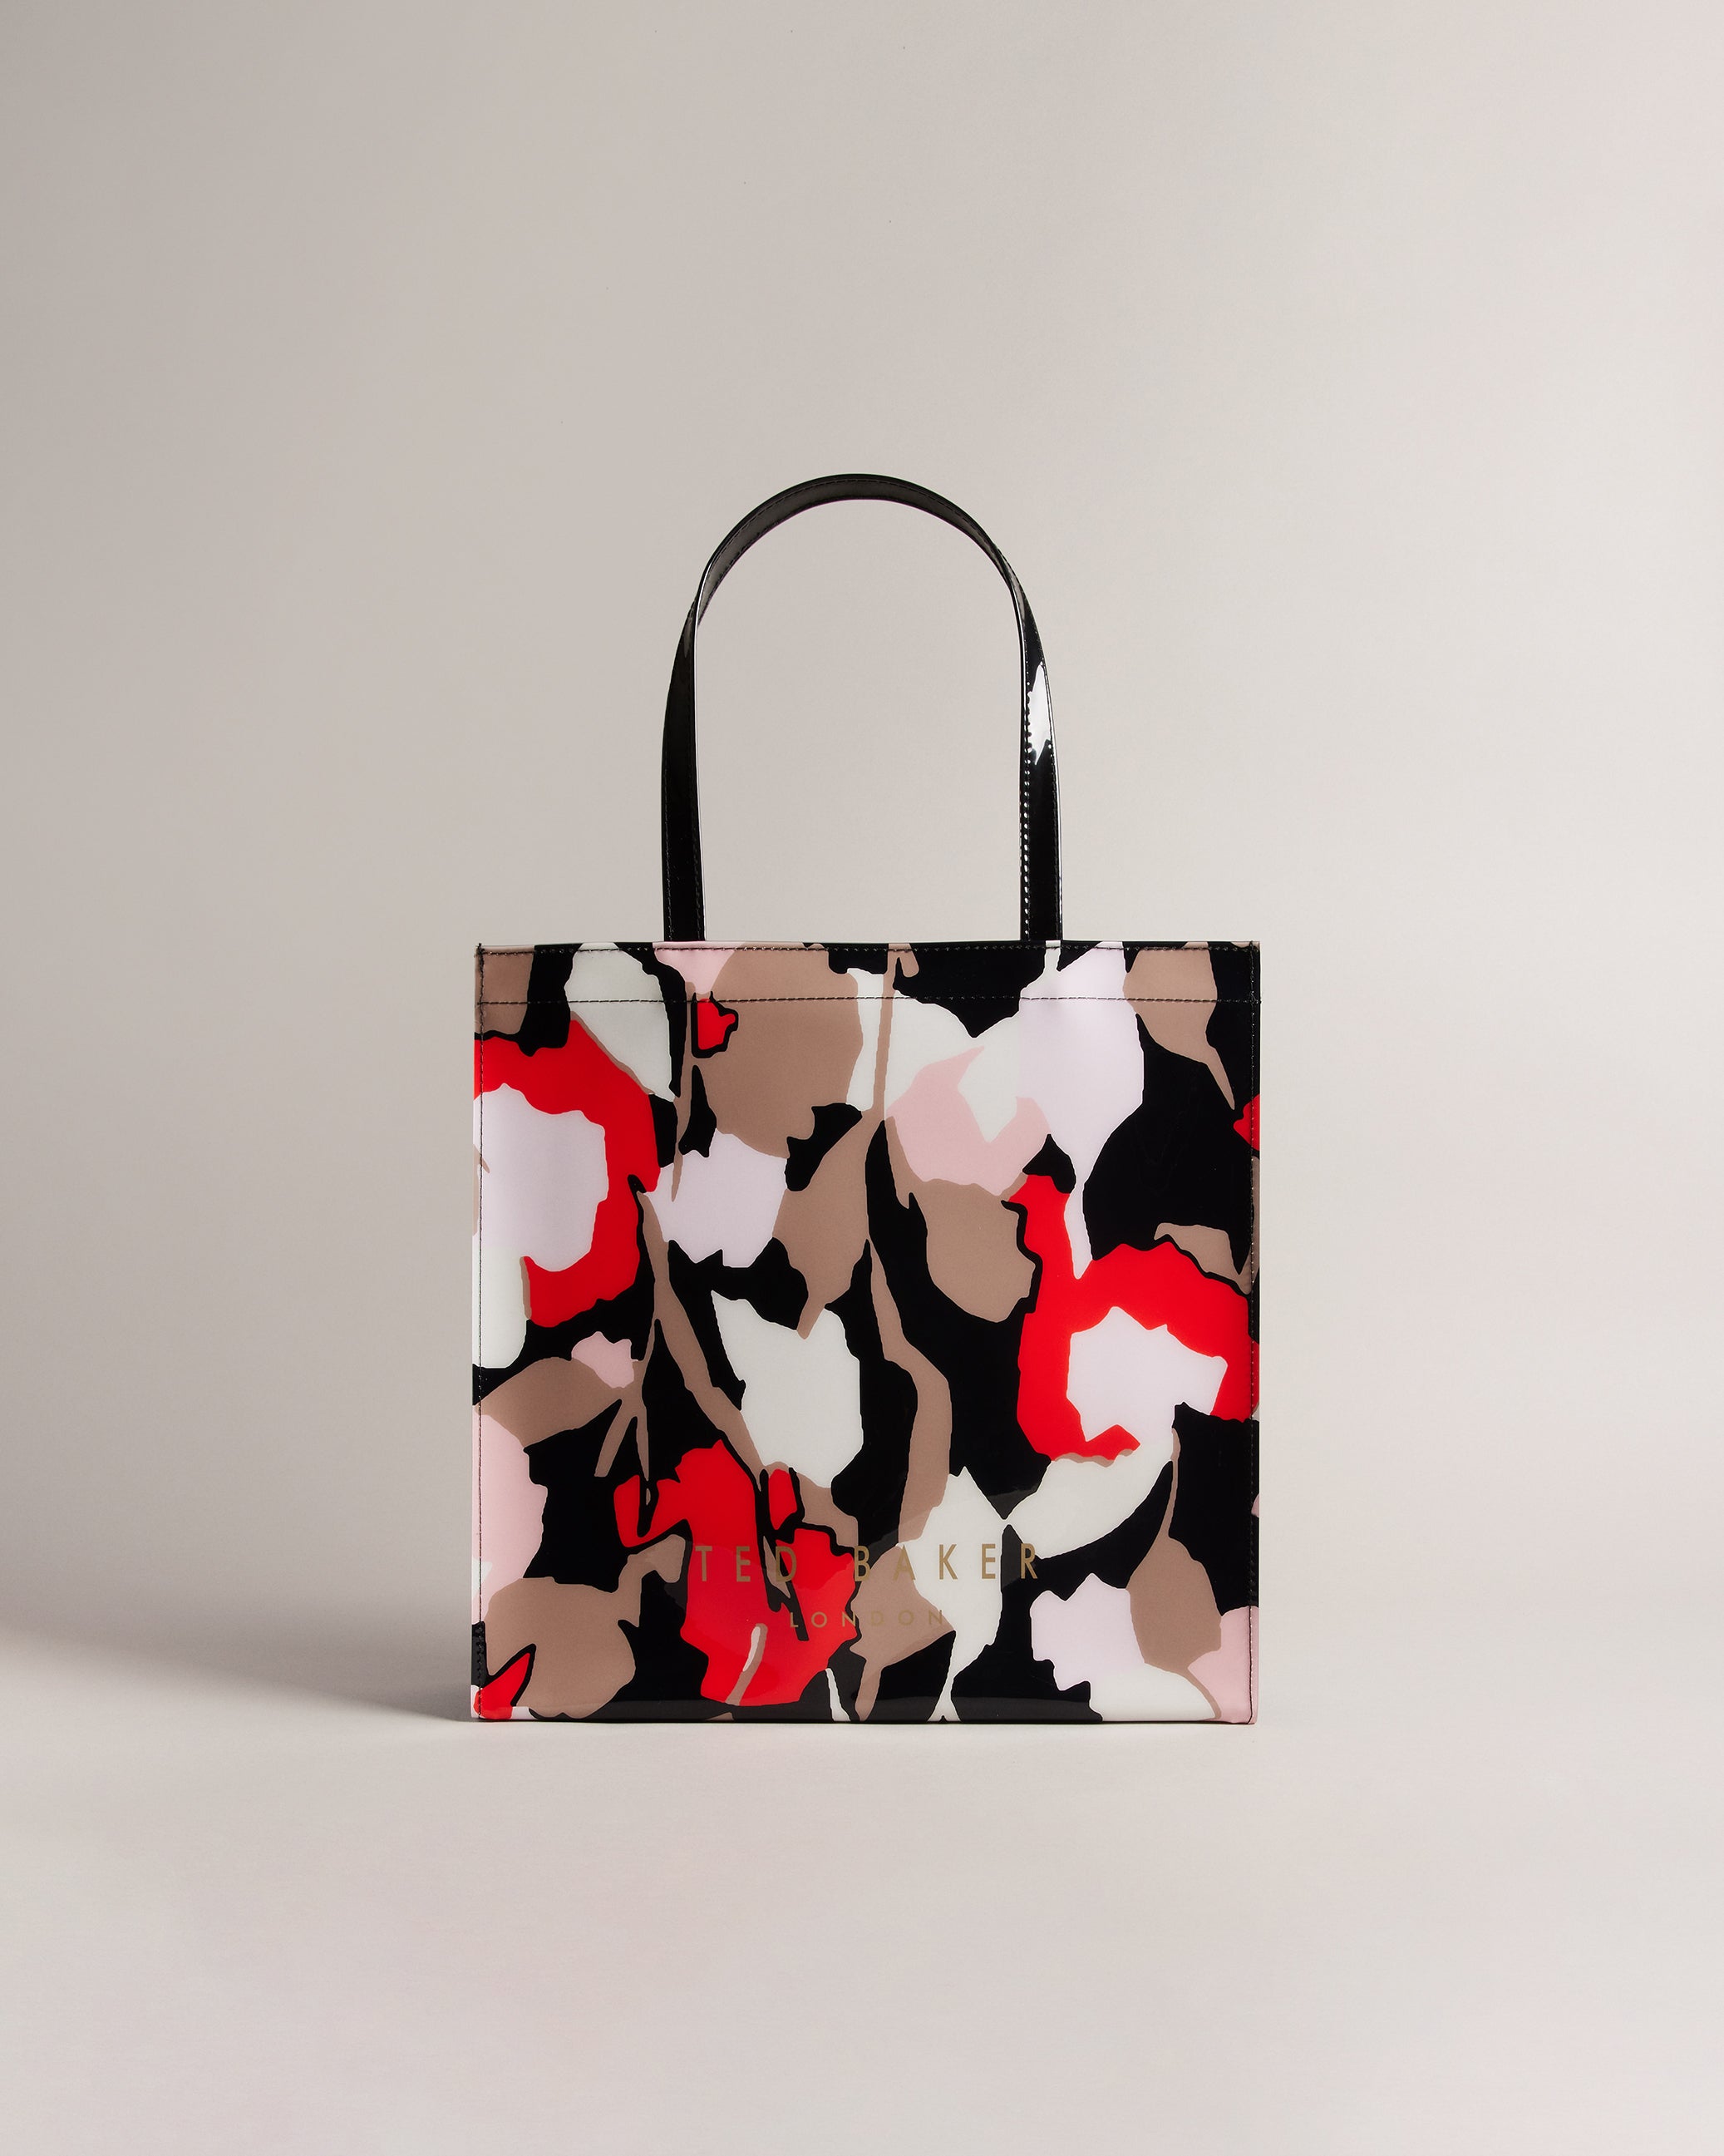 Ted Baker London Tote Bags for Women